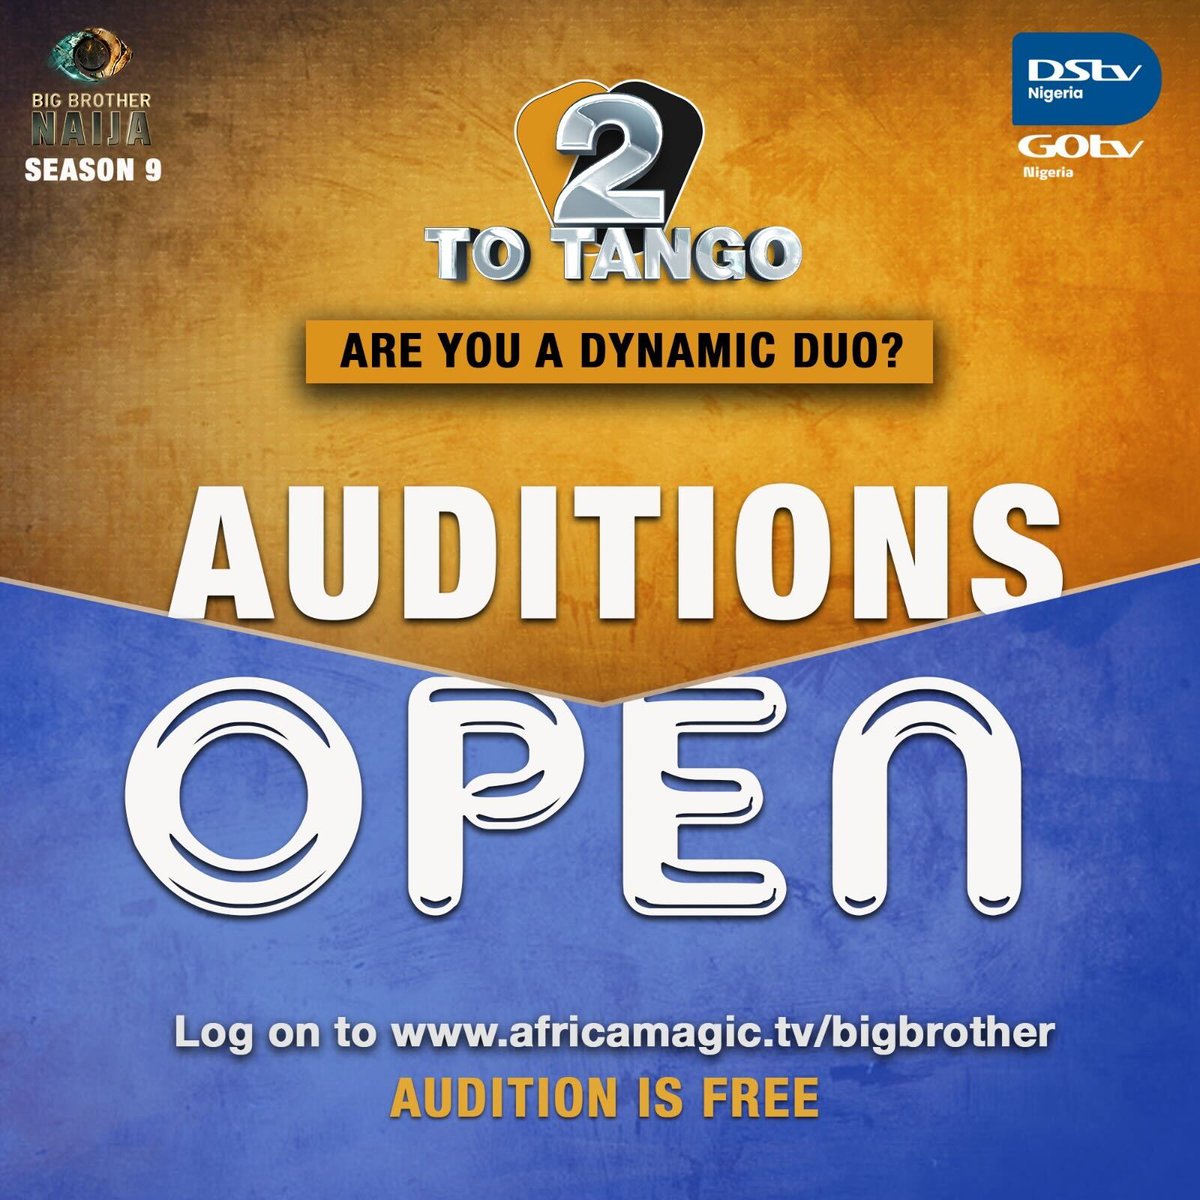 It’s official‼️ Auditions are now open! The search for the Dynamic Duo is on! Could it be you and yours? We’ll never know until you both take that shot! Biggie is waiting. Visit africamagic.tv/bigbrother to submit your entry. #BBN9 #BBNaija #BBNAudition